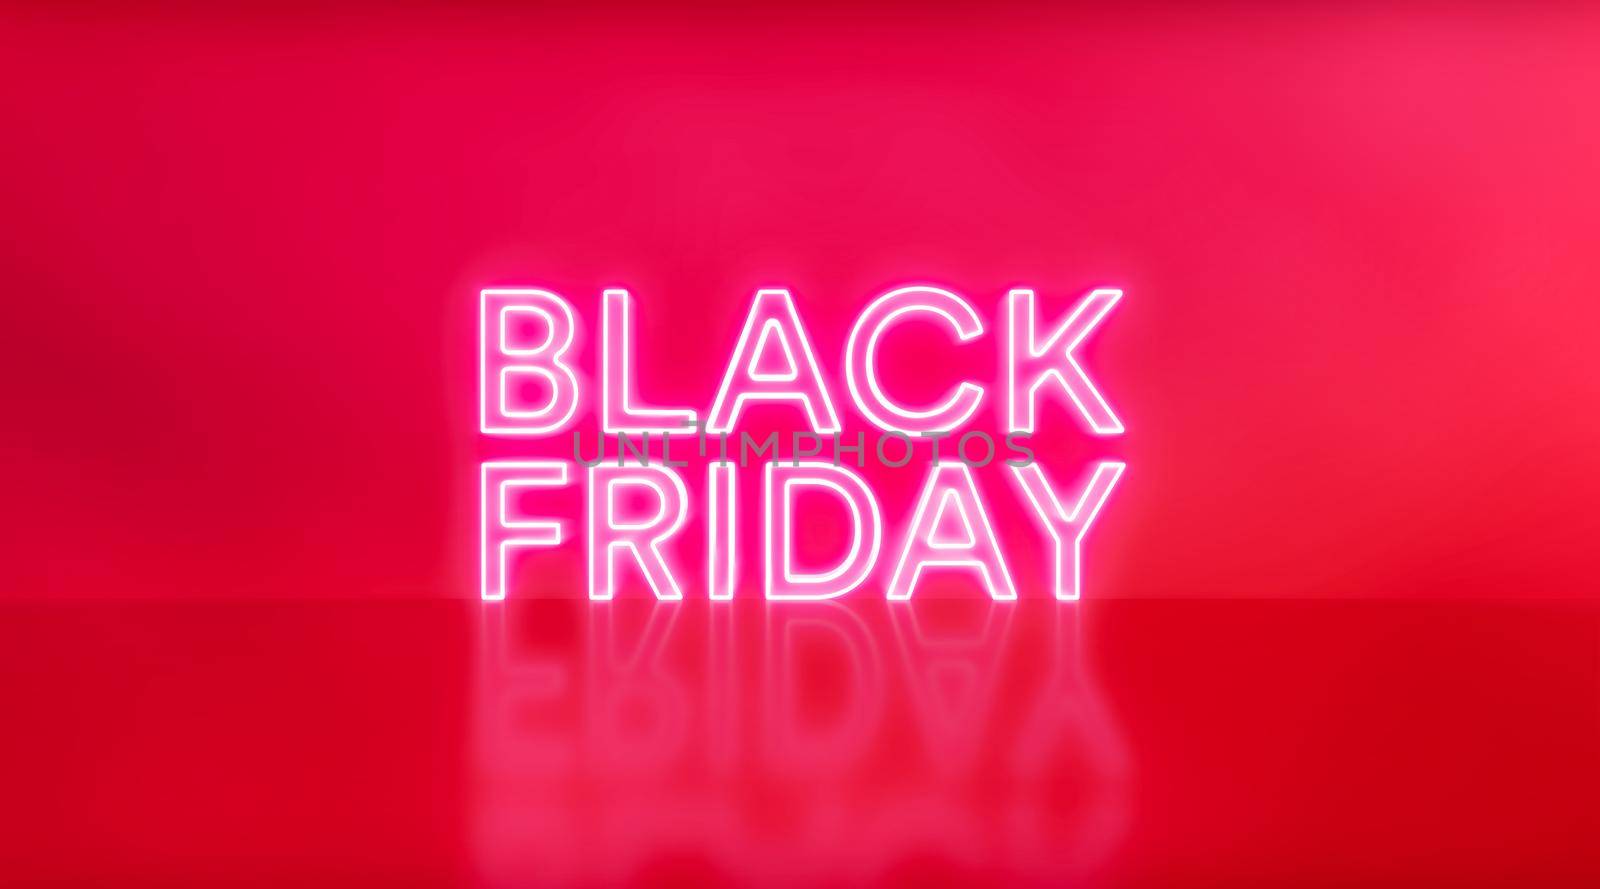 Black Friday sale. Black Friday neon sign on red studio background. Glowing white and red neon text for advertising and promotion.